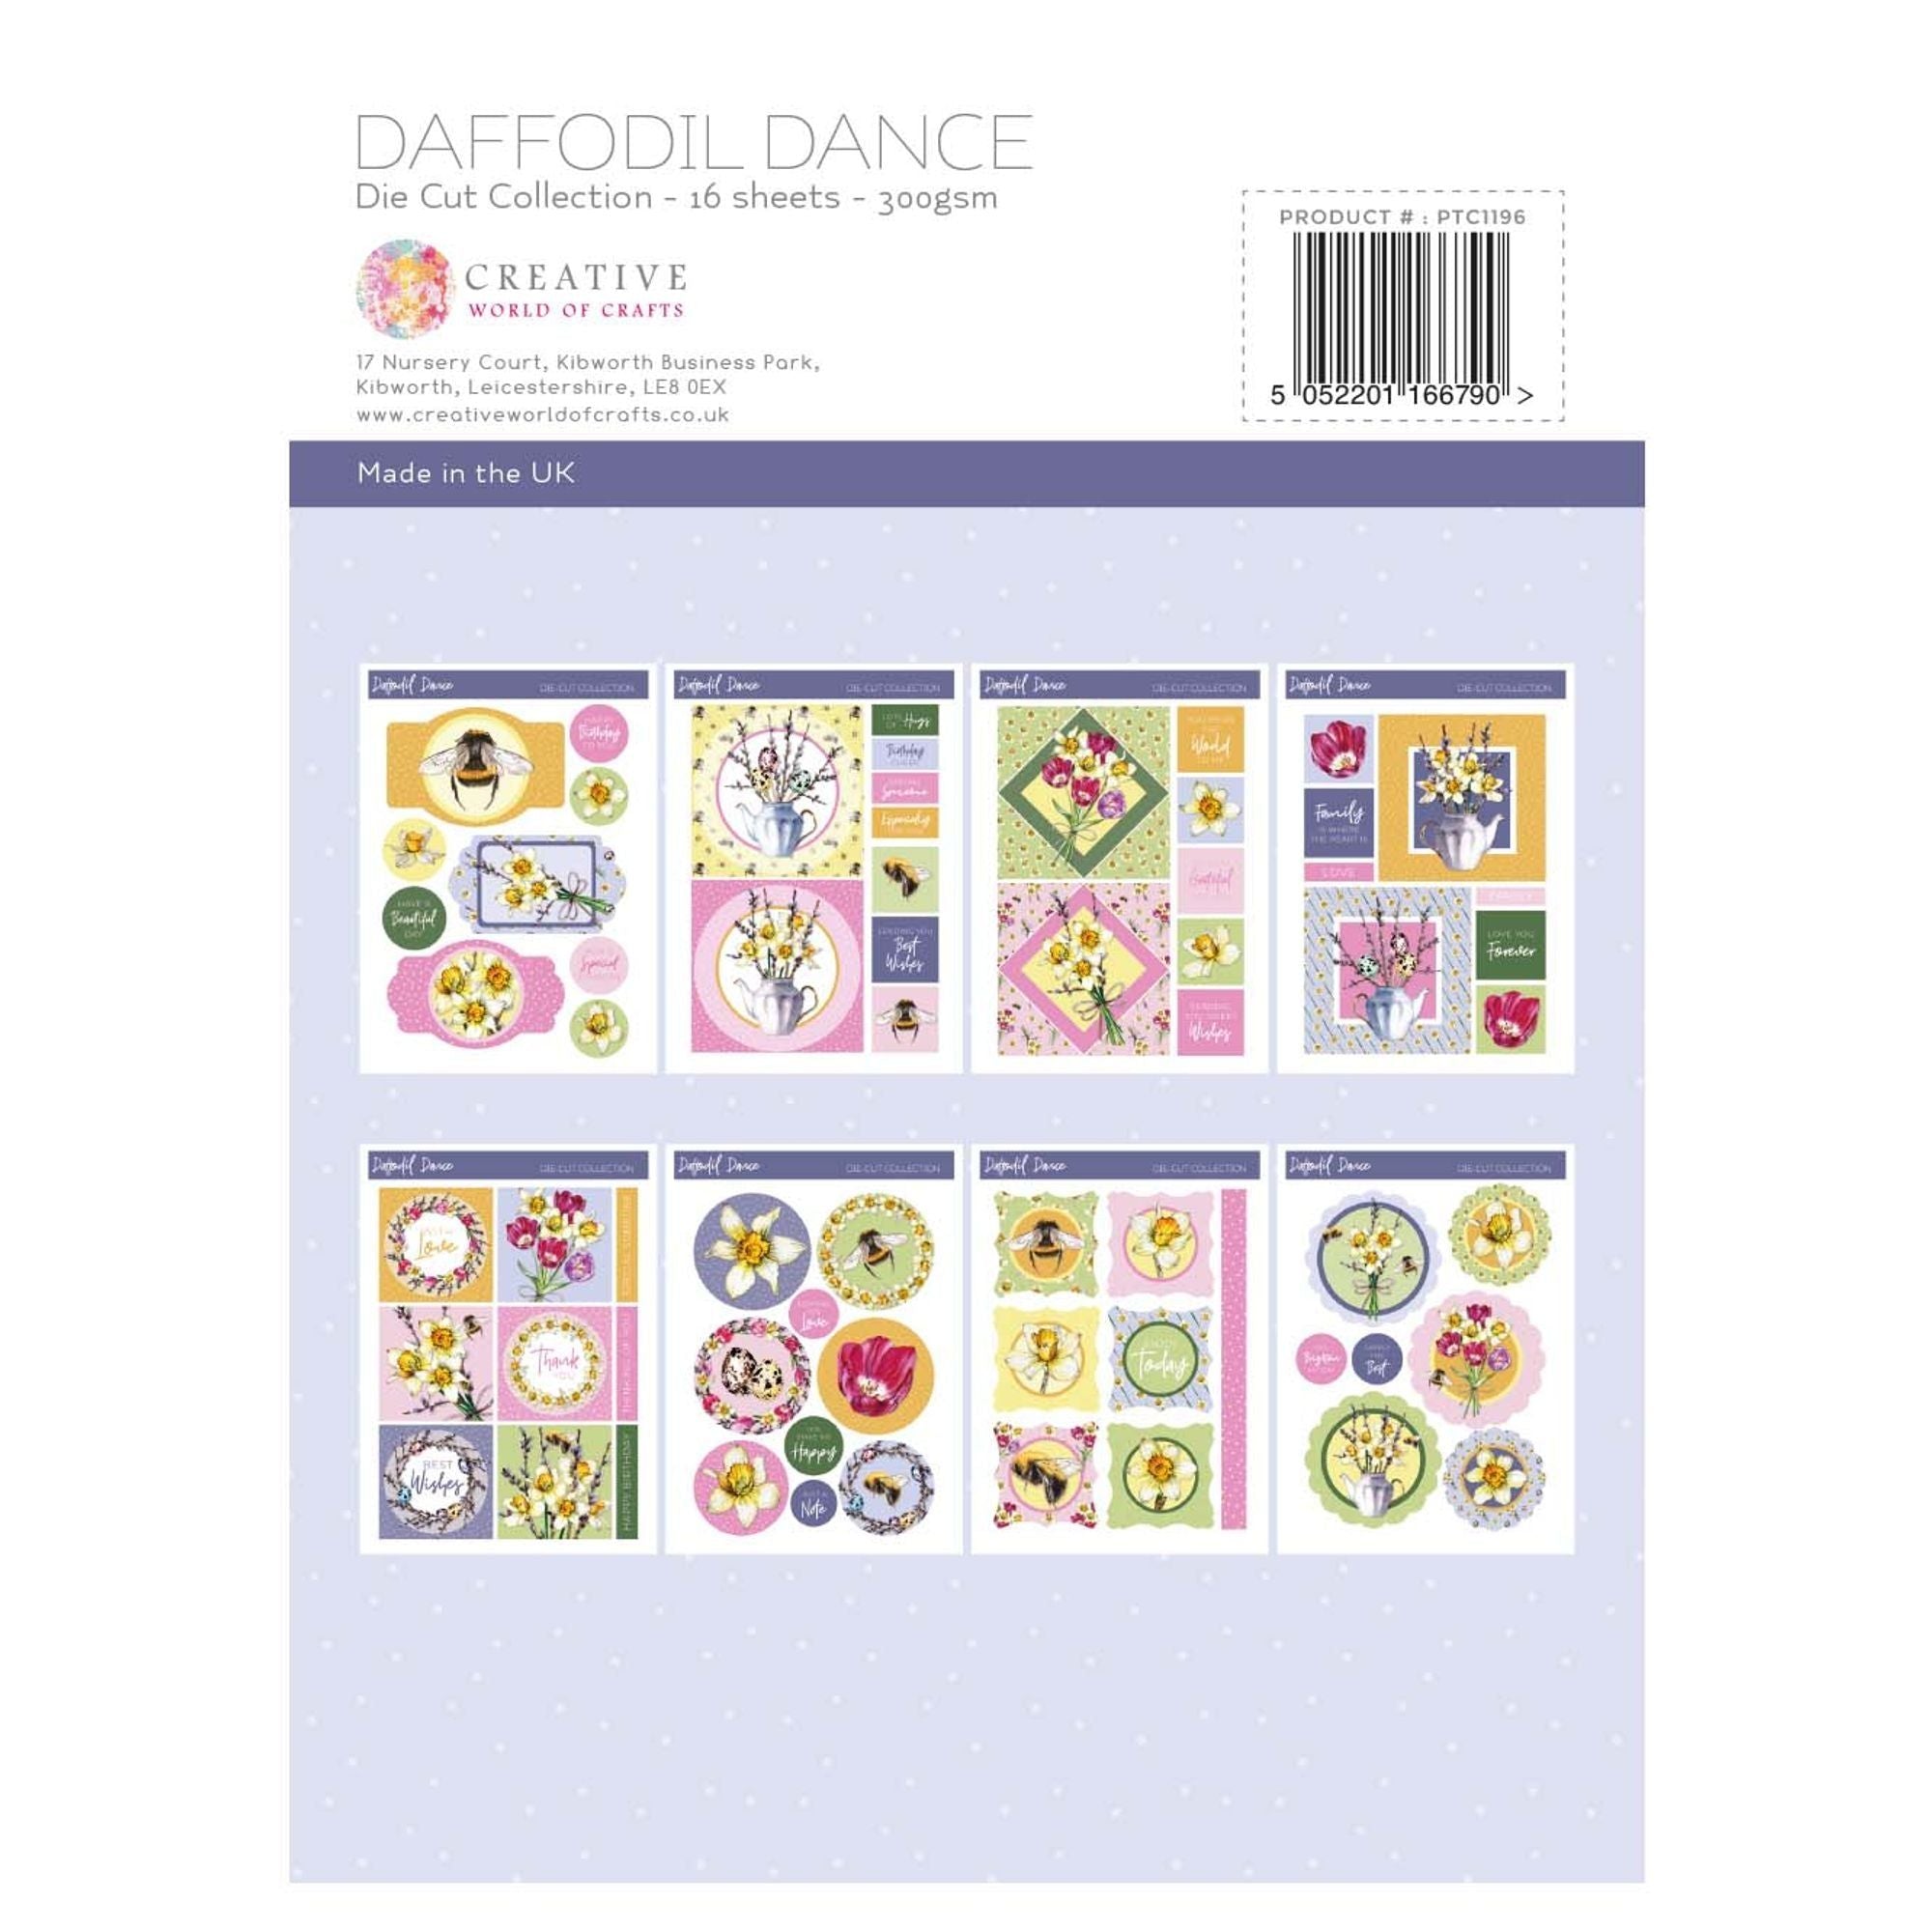 The Paper Tree Daffodil Dance A4 Die Cut sheets